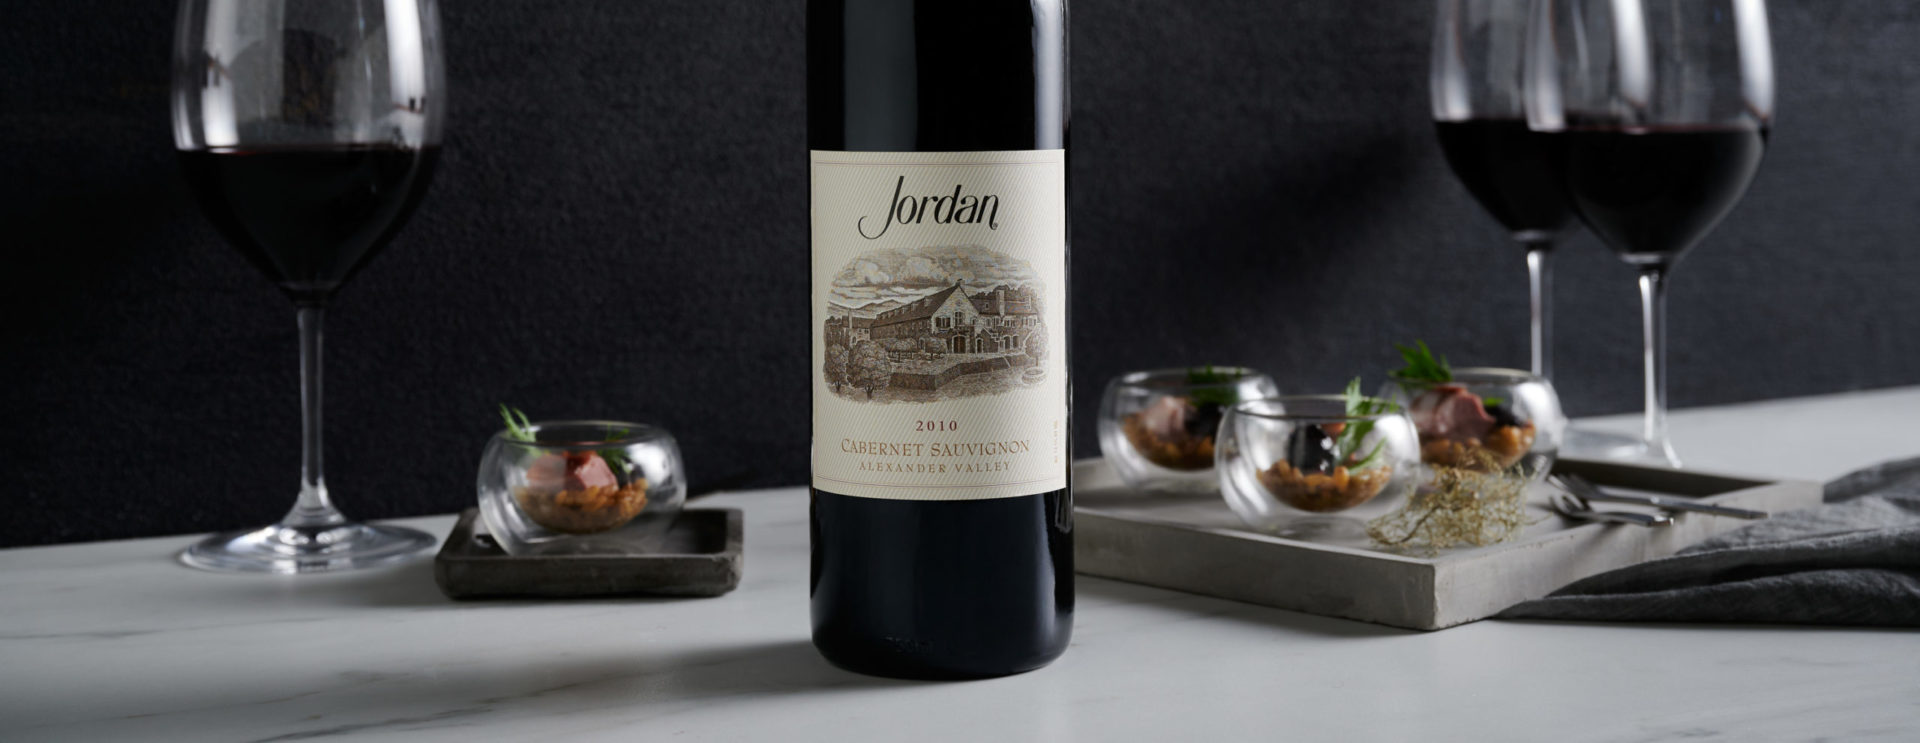 Bottle and glasses of Jordan Cabernet Sauvignon with food